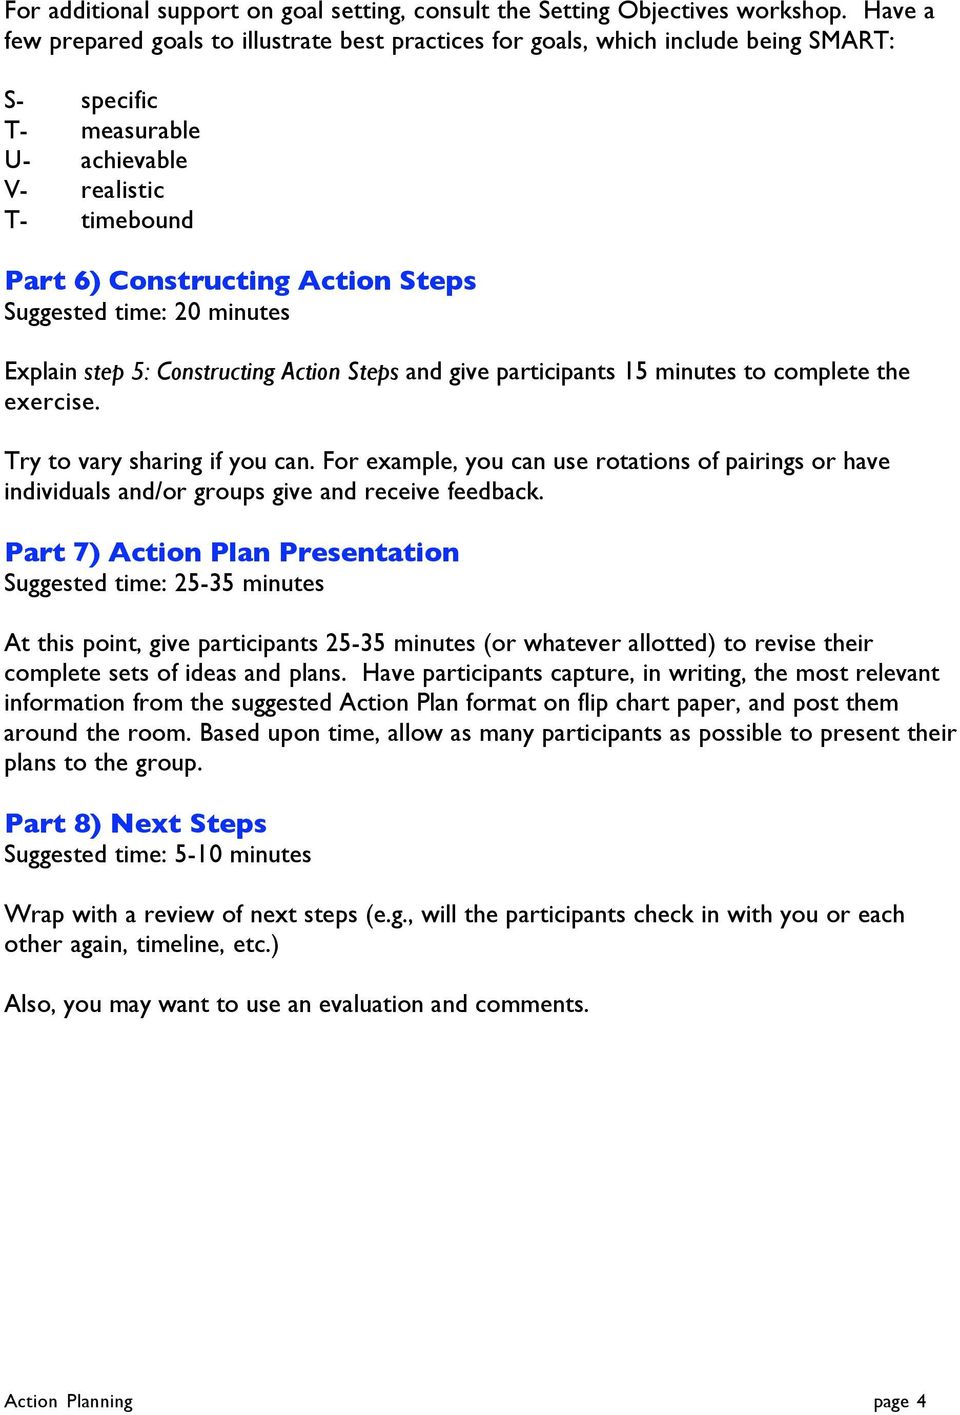 Suggested time: 20 minutes Explain step 5: Constructing Action Steps and give participants 15 minutes to complete the exercise. Try to vary sharing if you can.